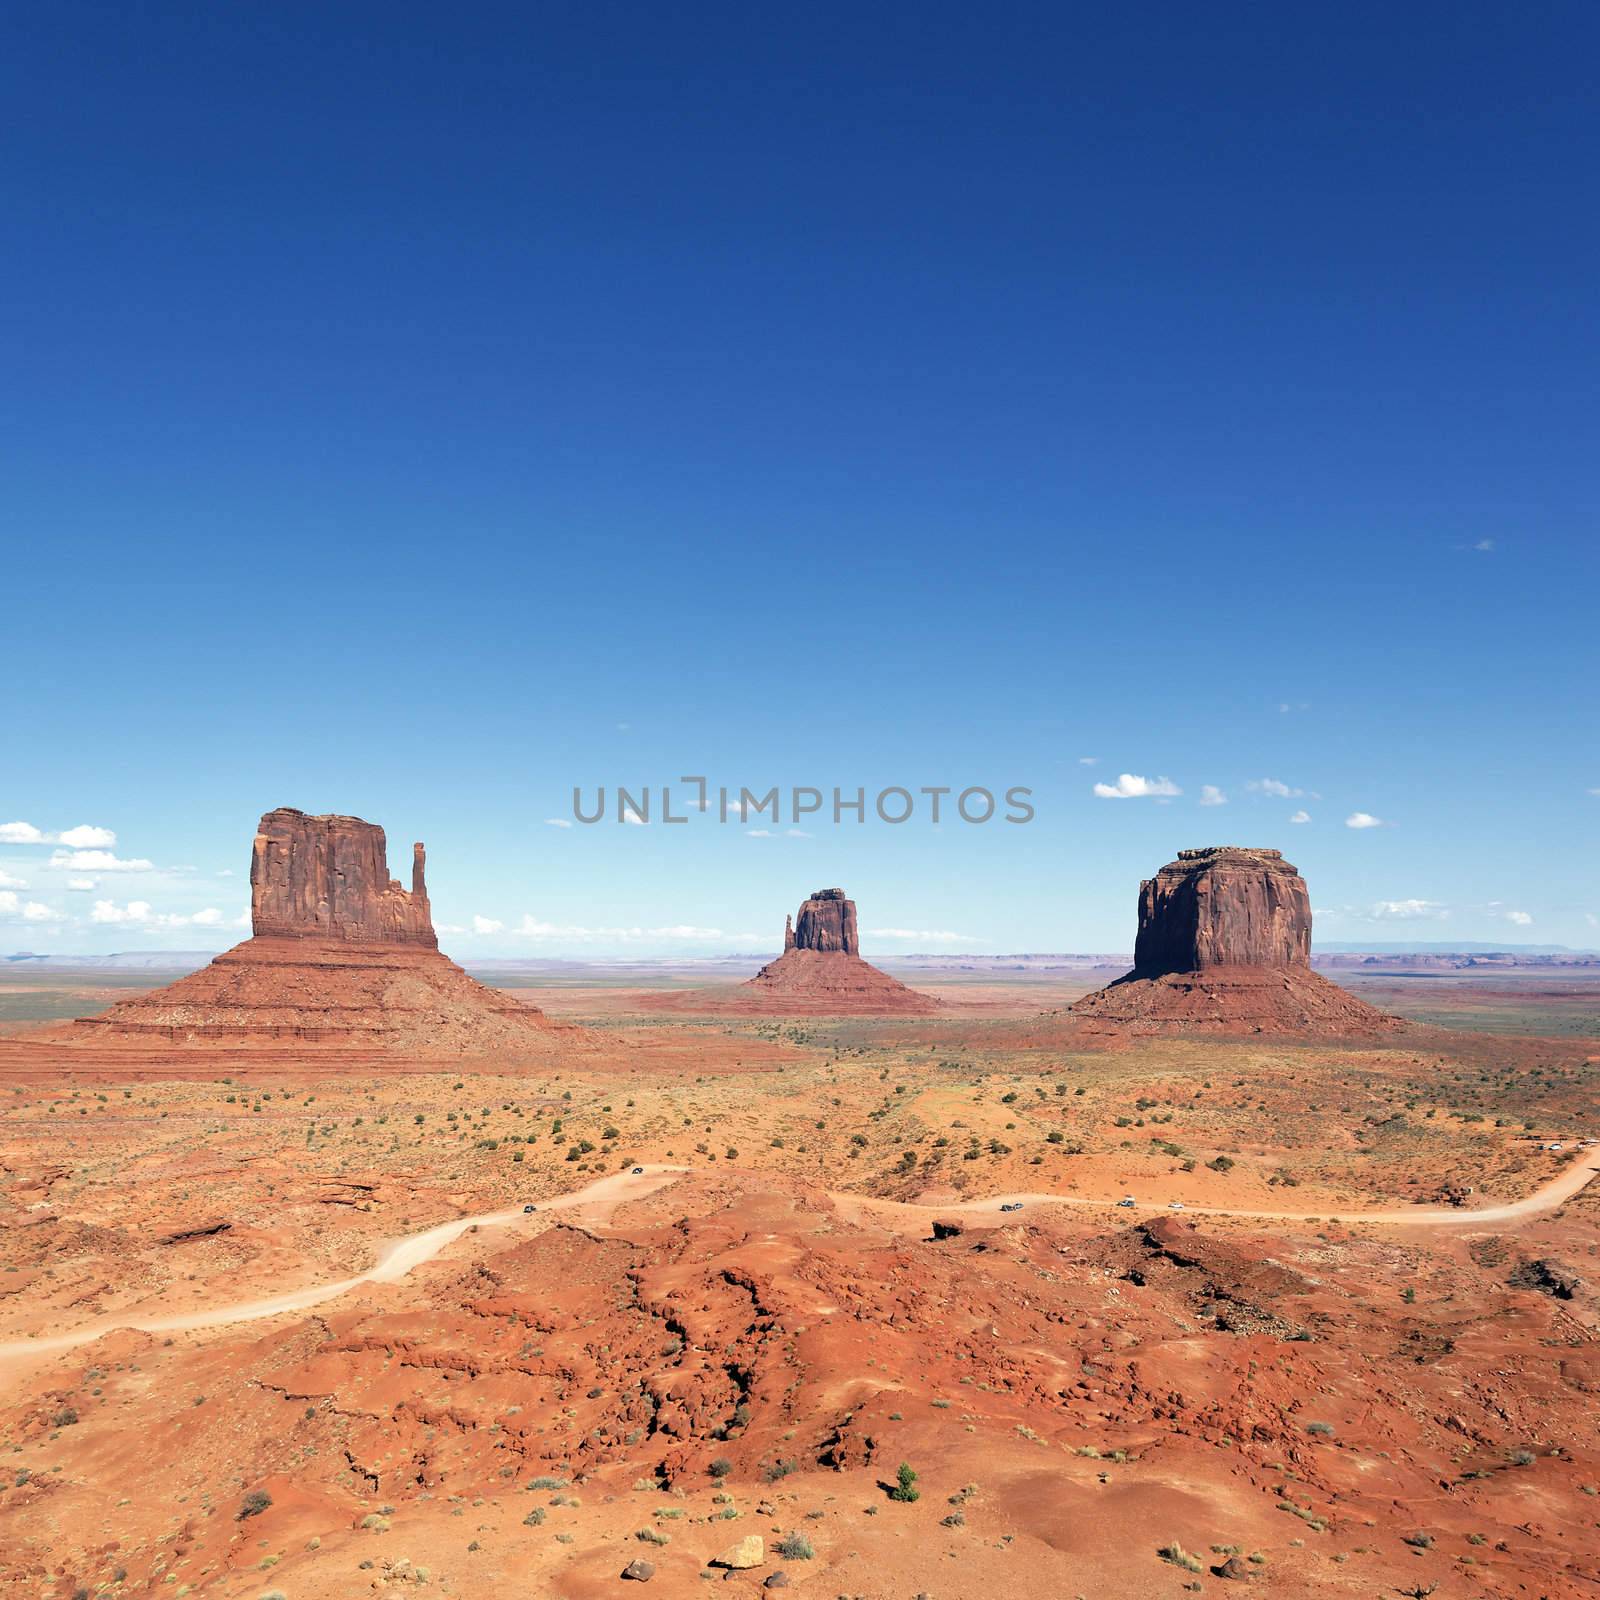 famous landscape of Monument Valley, Utah, USA. 